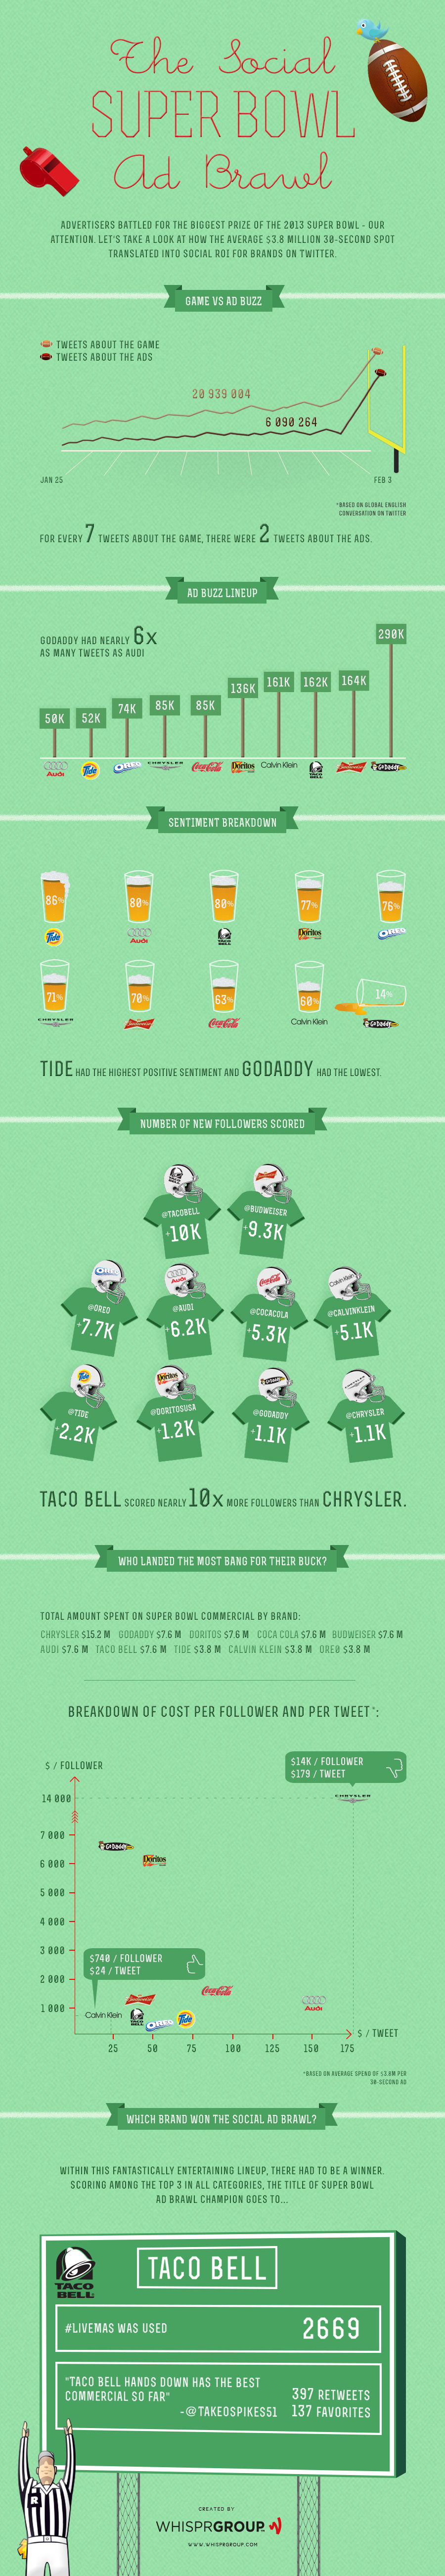 Infographic-Superbowl-1